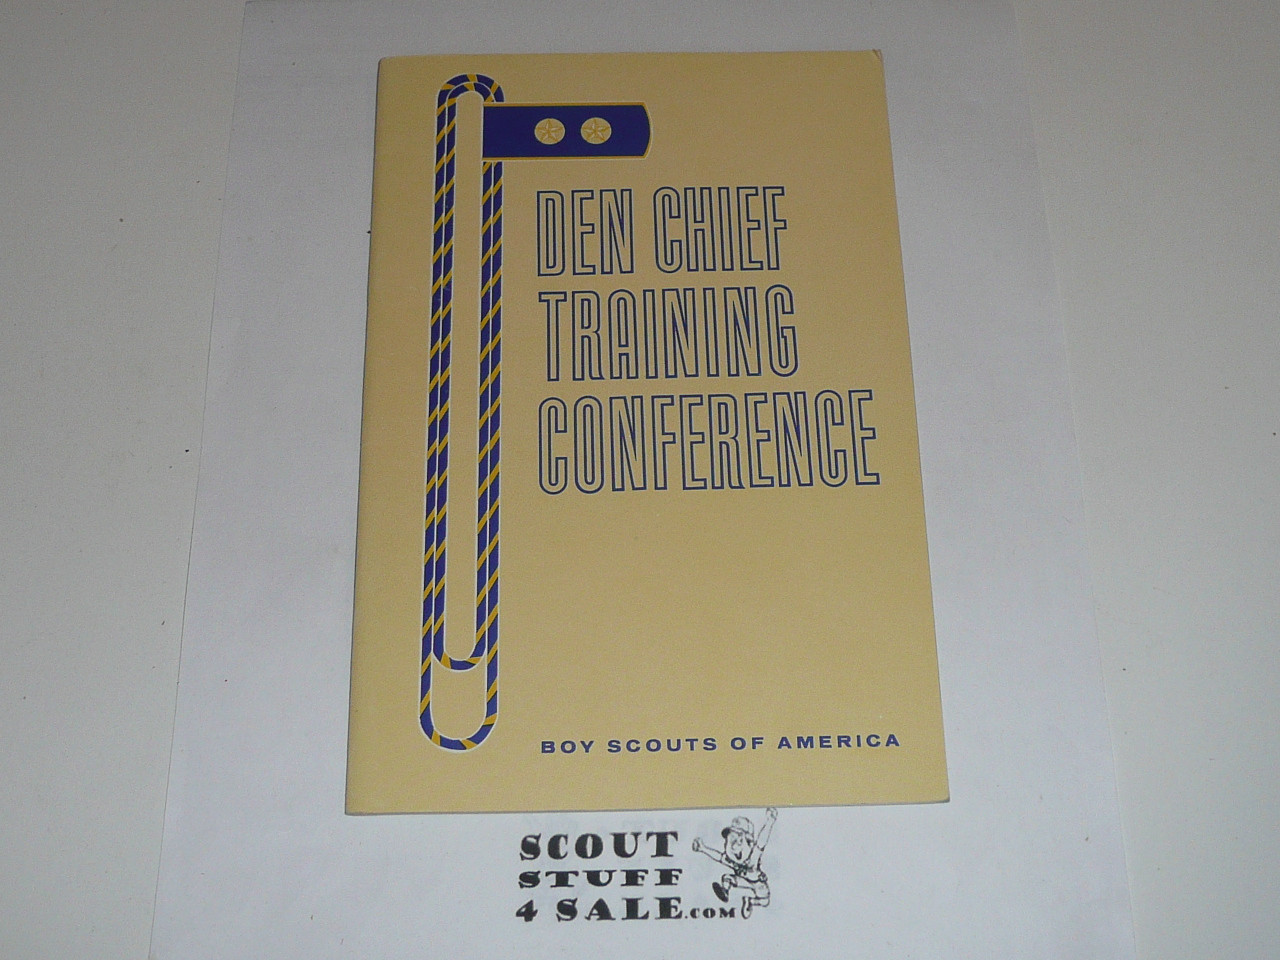 Den Chief Training Conference, Cub Scouts, 1-64 printing